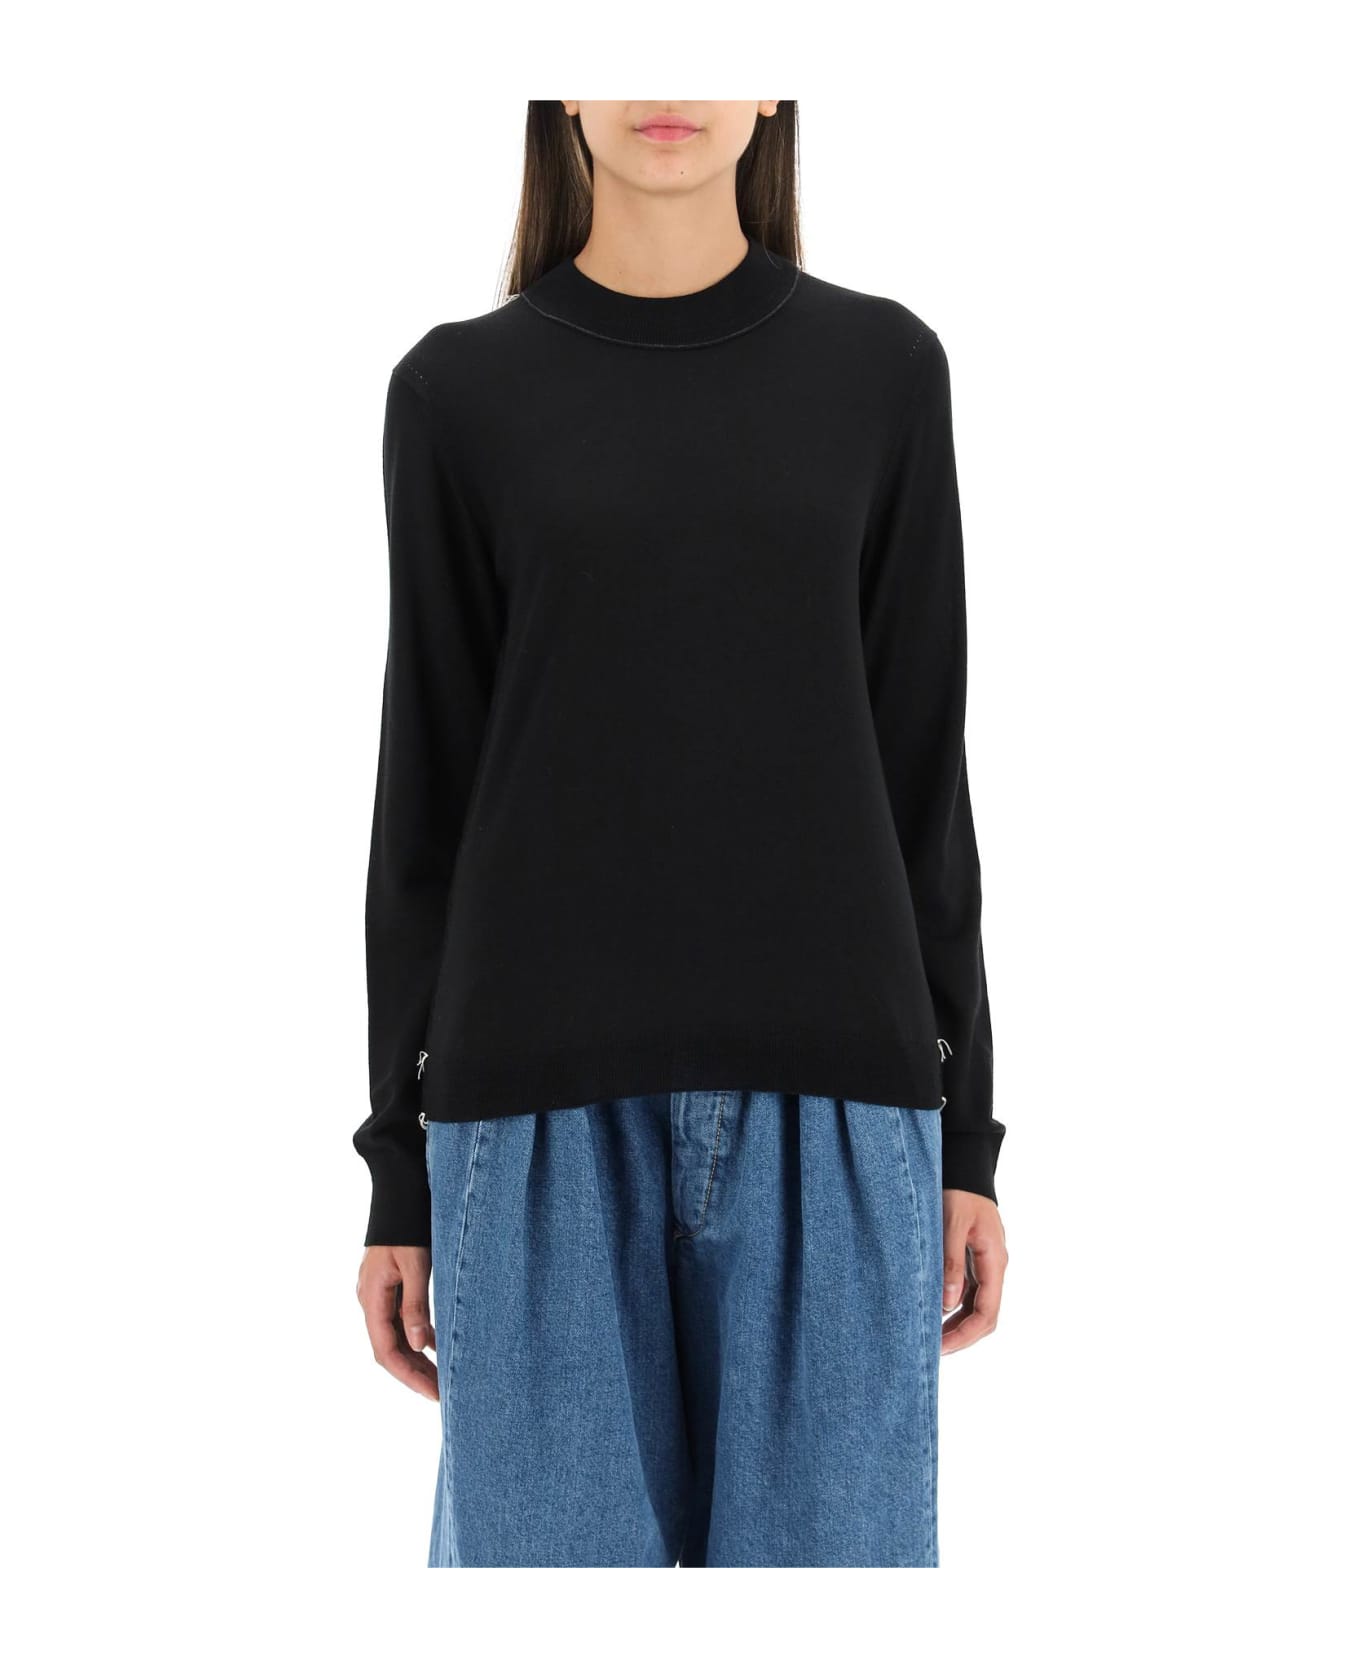 Maison Margiela Wool Sweater With Inside-out Seams - BLACK (Black) ニットウェア